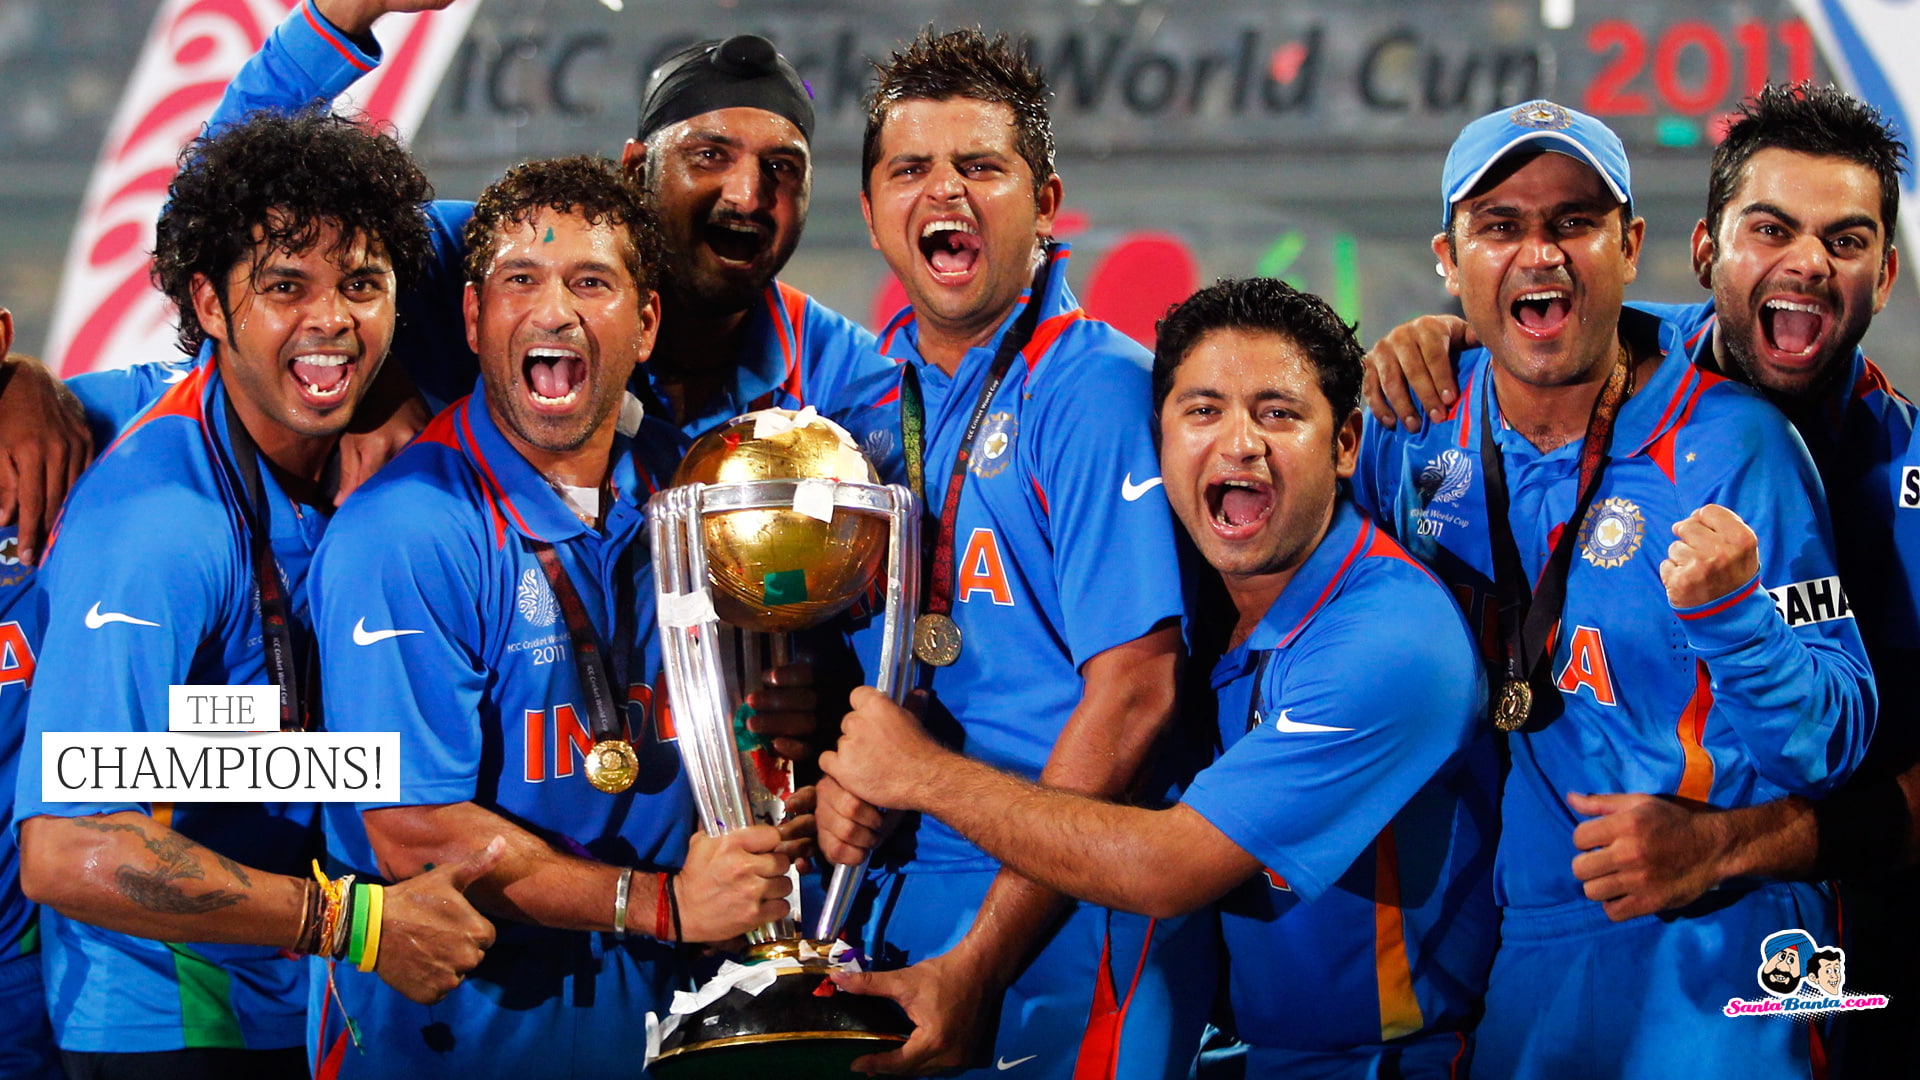 Team India 2011 World Cup, sport, happiness, emotion, celebration